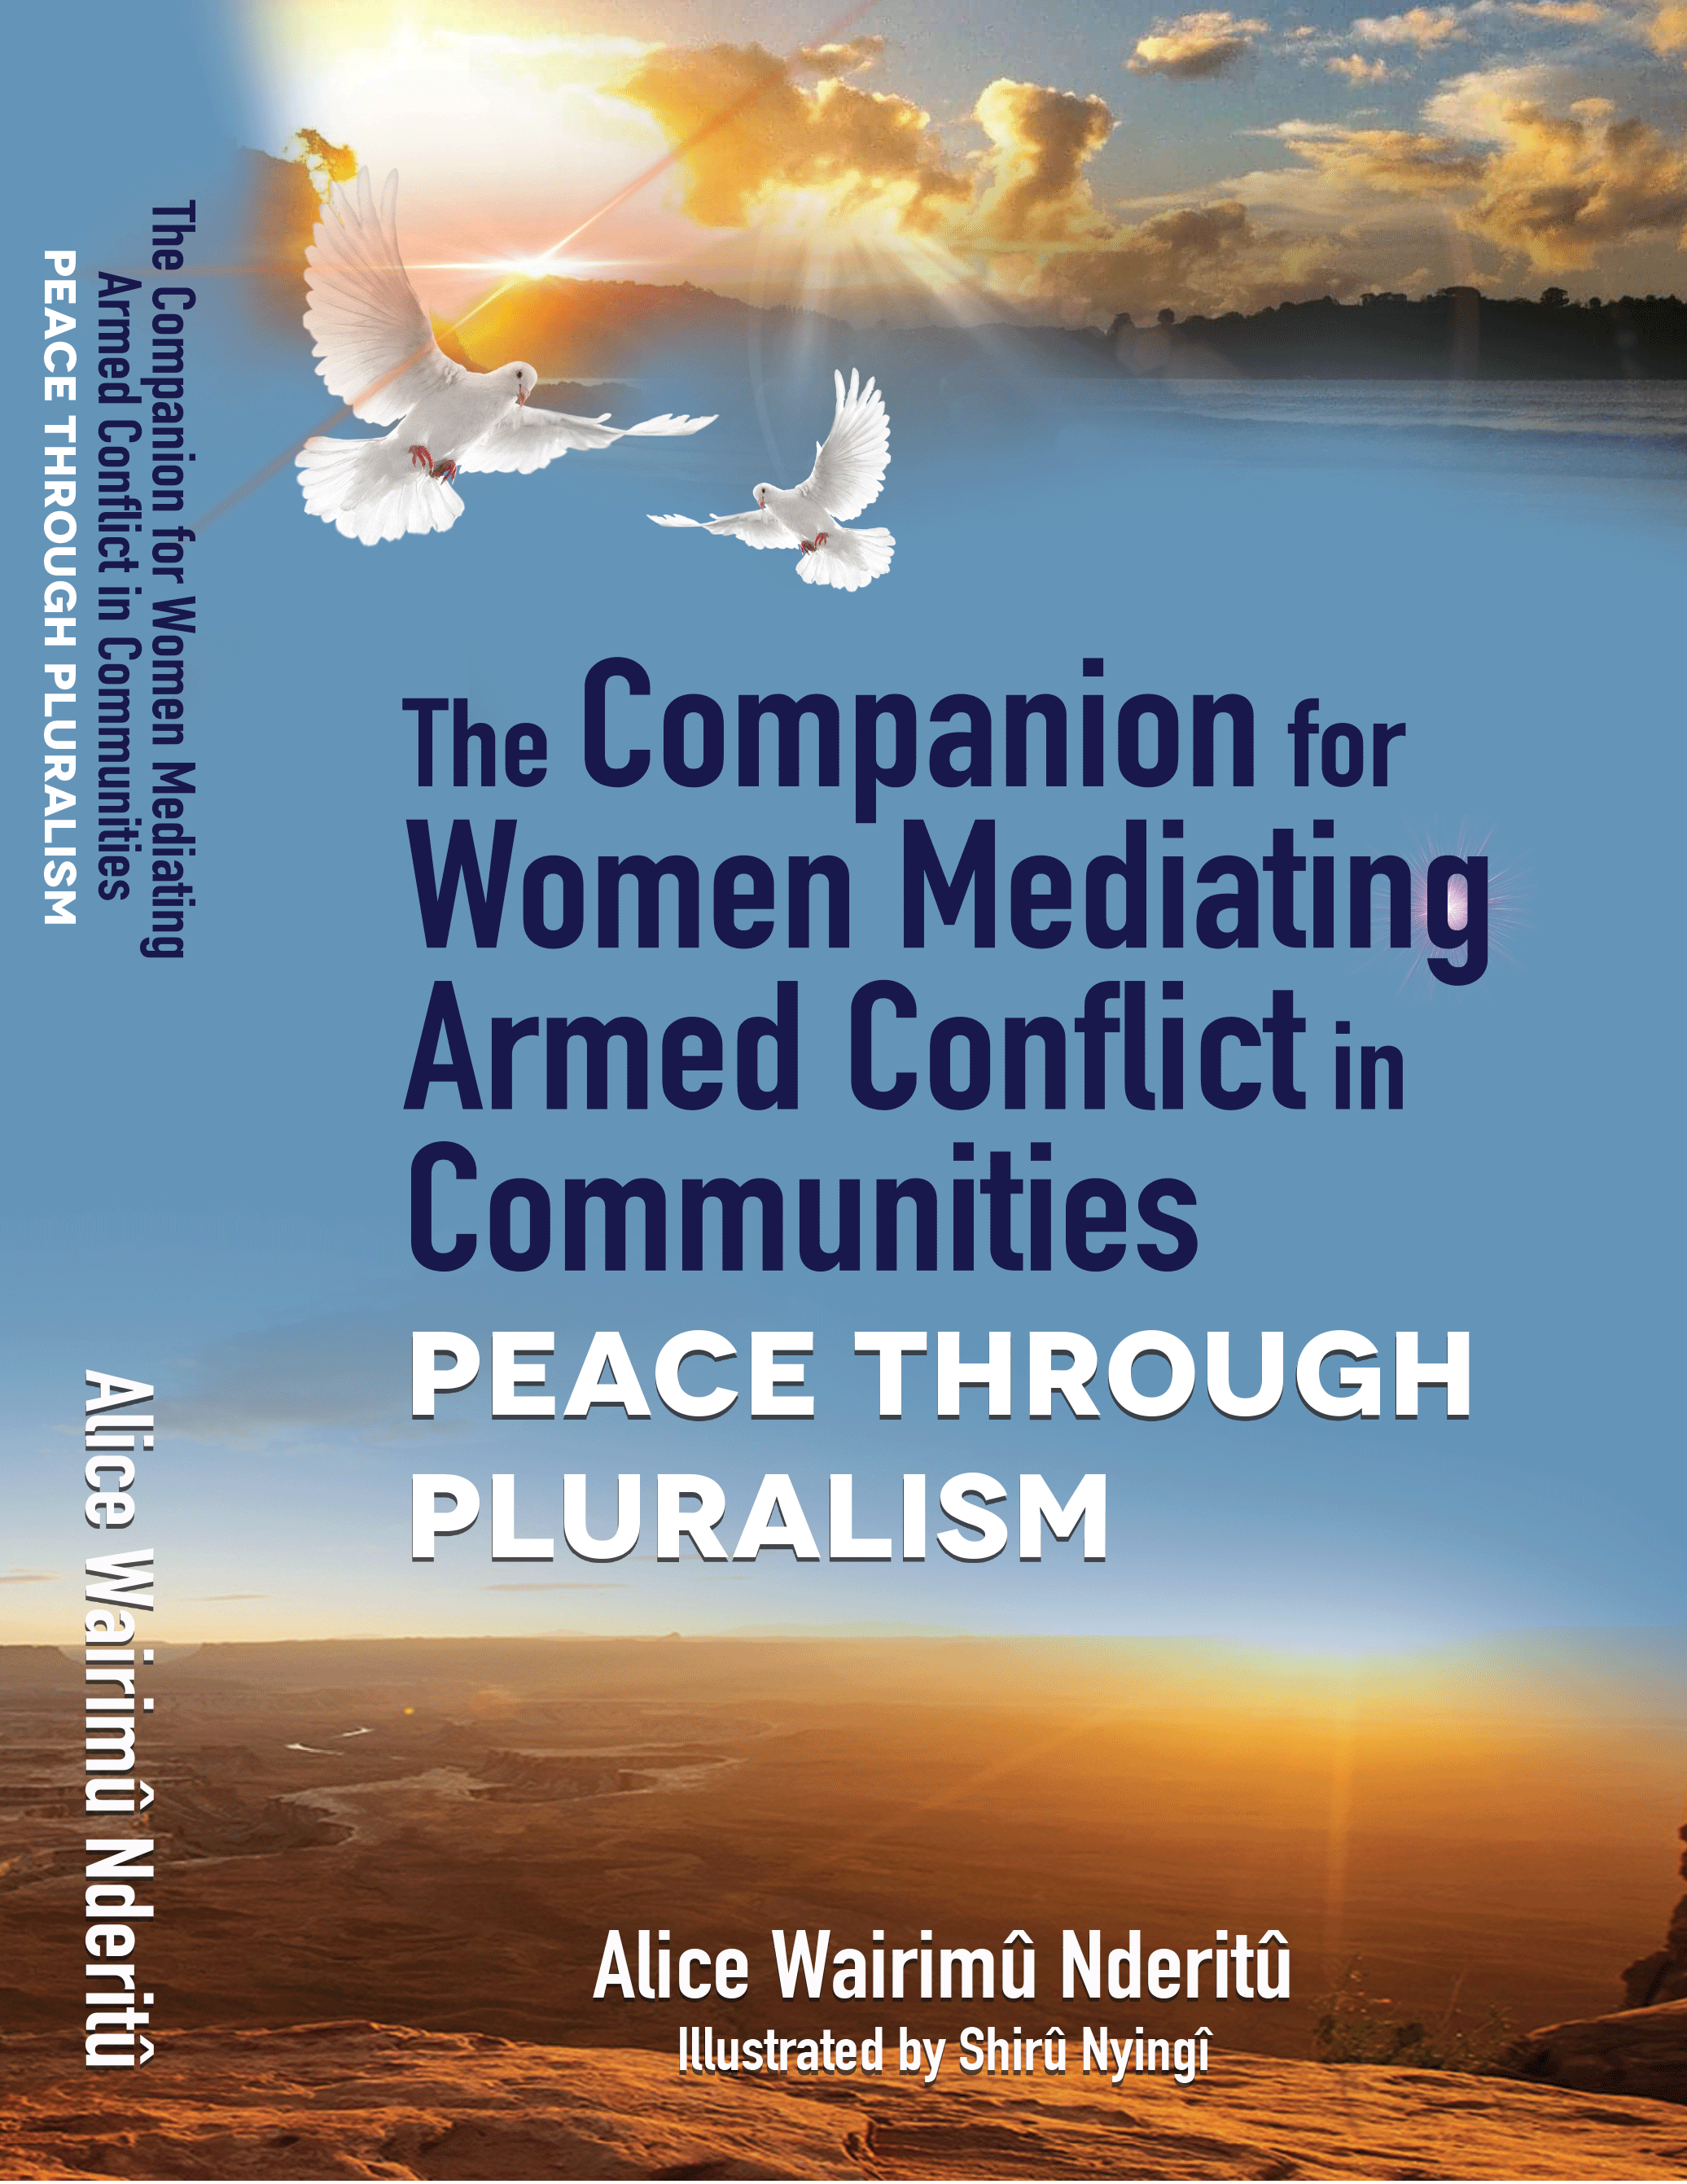 The Companion Book For Women Mediating Armed Conflict In Communities